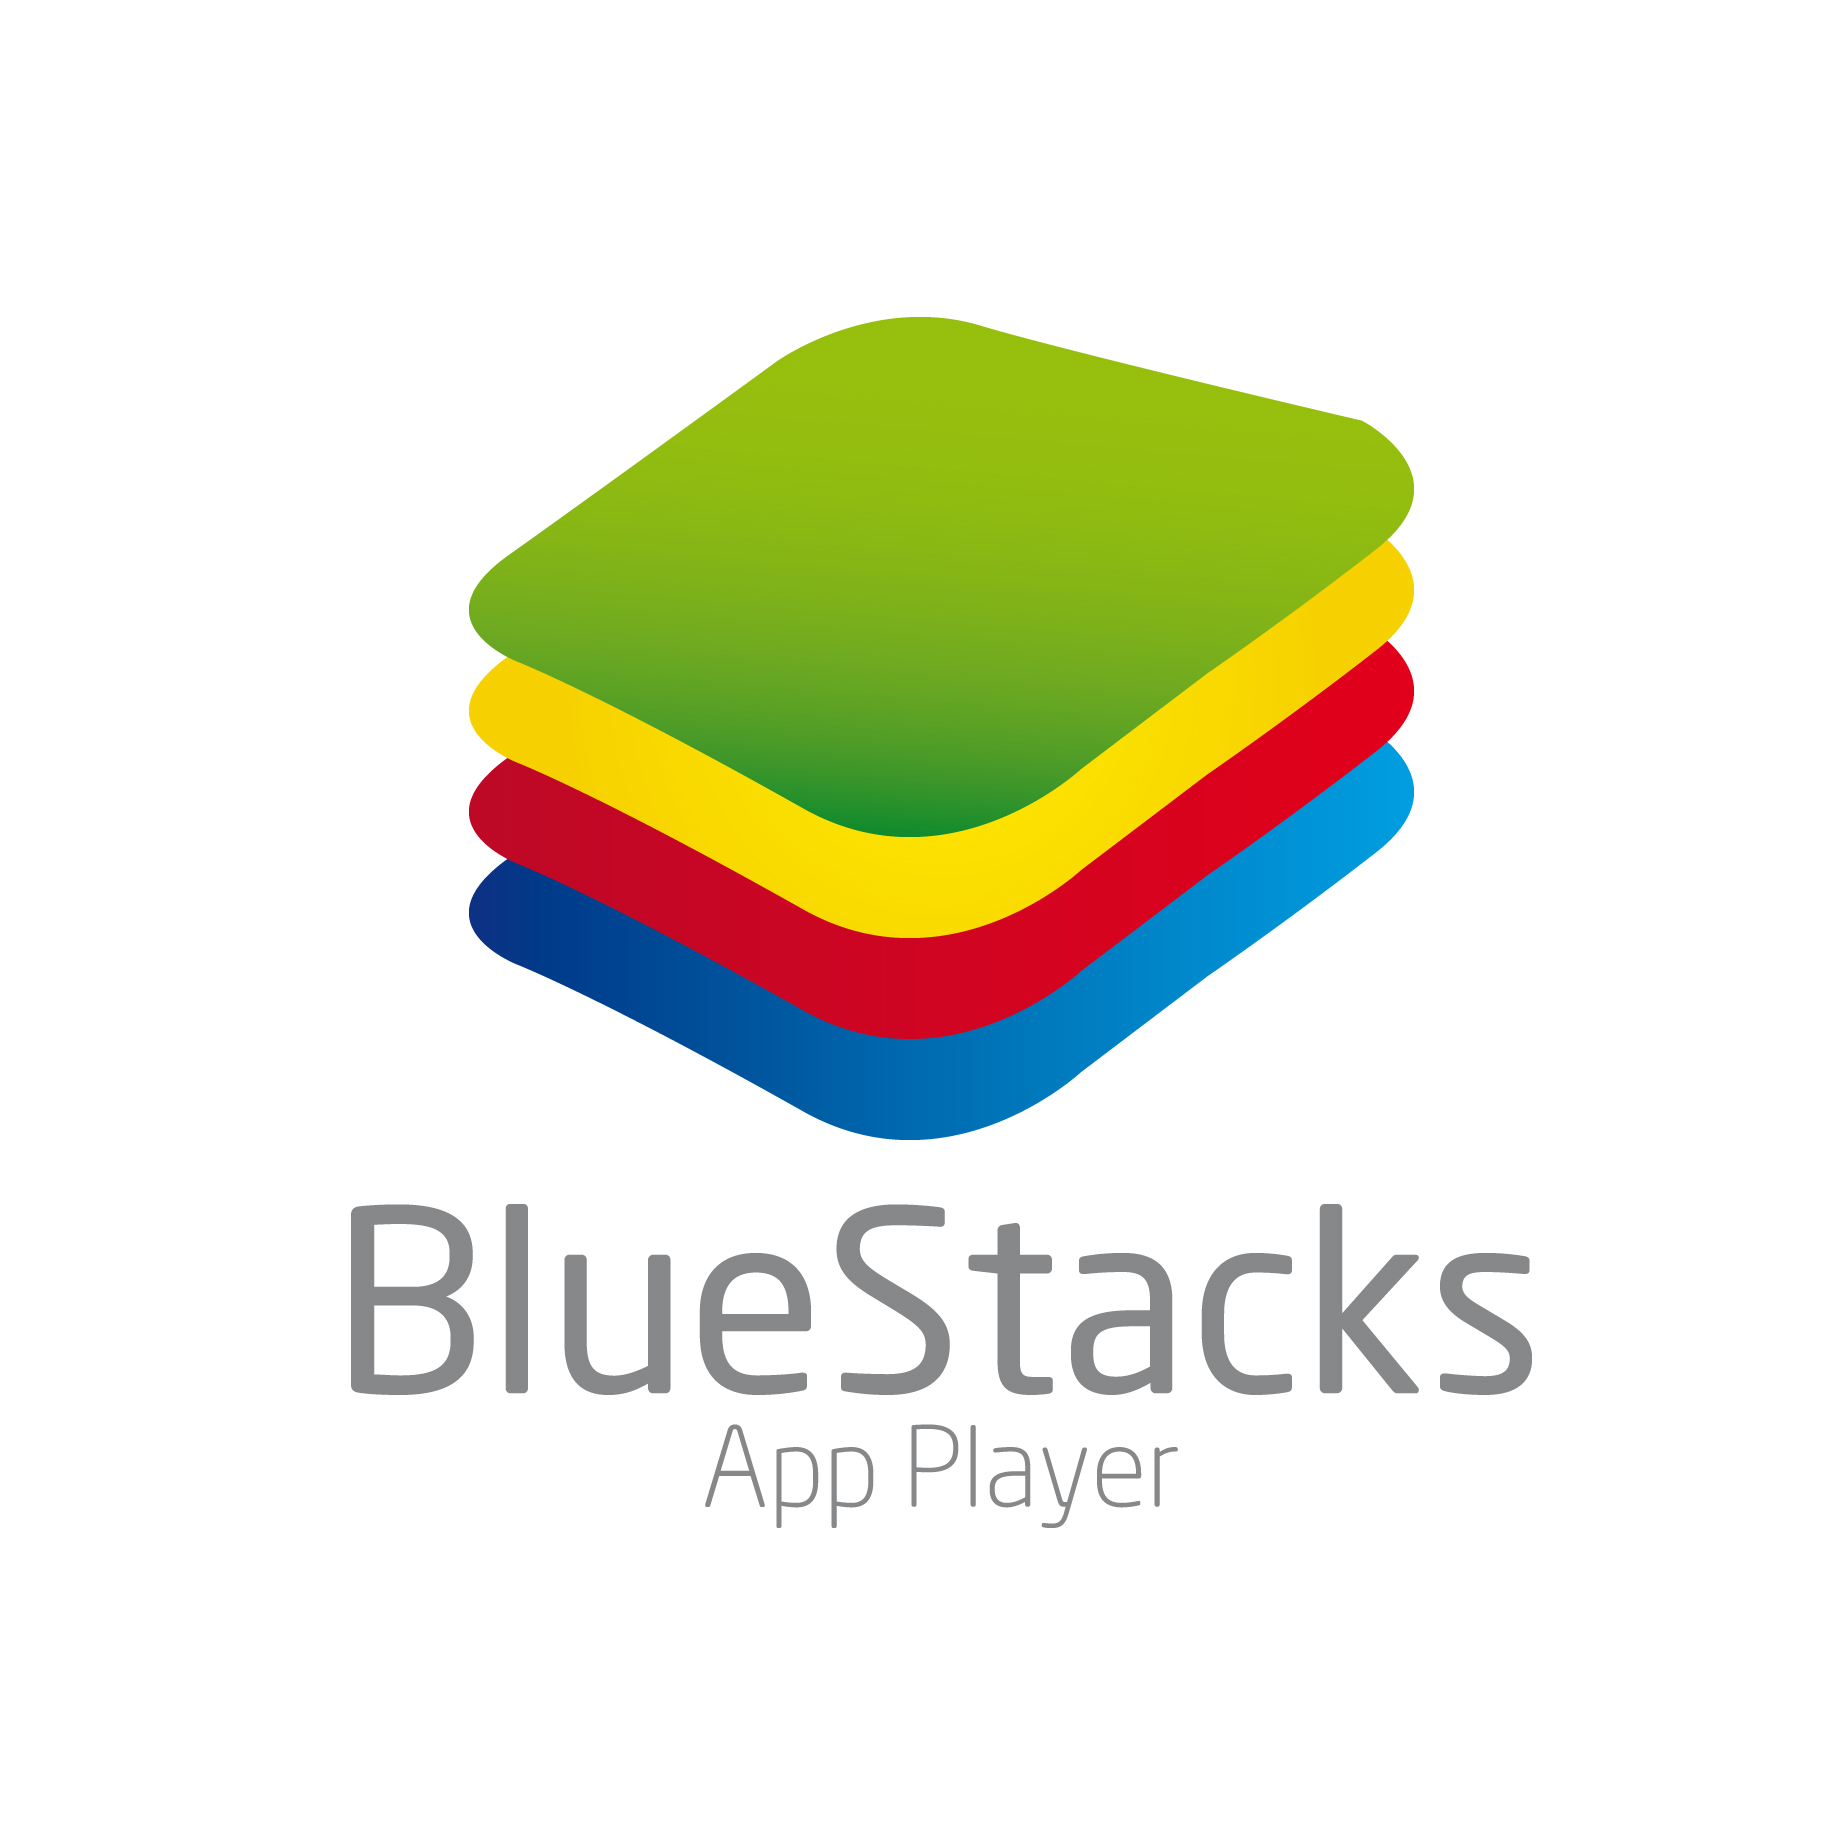 BlueStacks App Player Enters Beta, Brings 450,000 Android Apps to Your